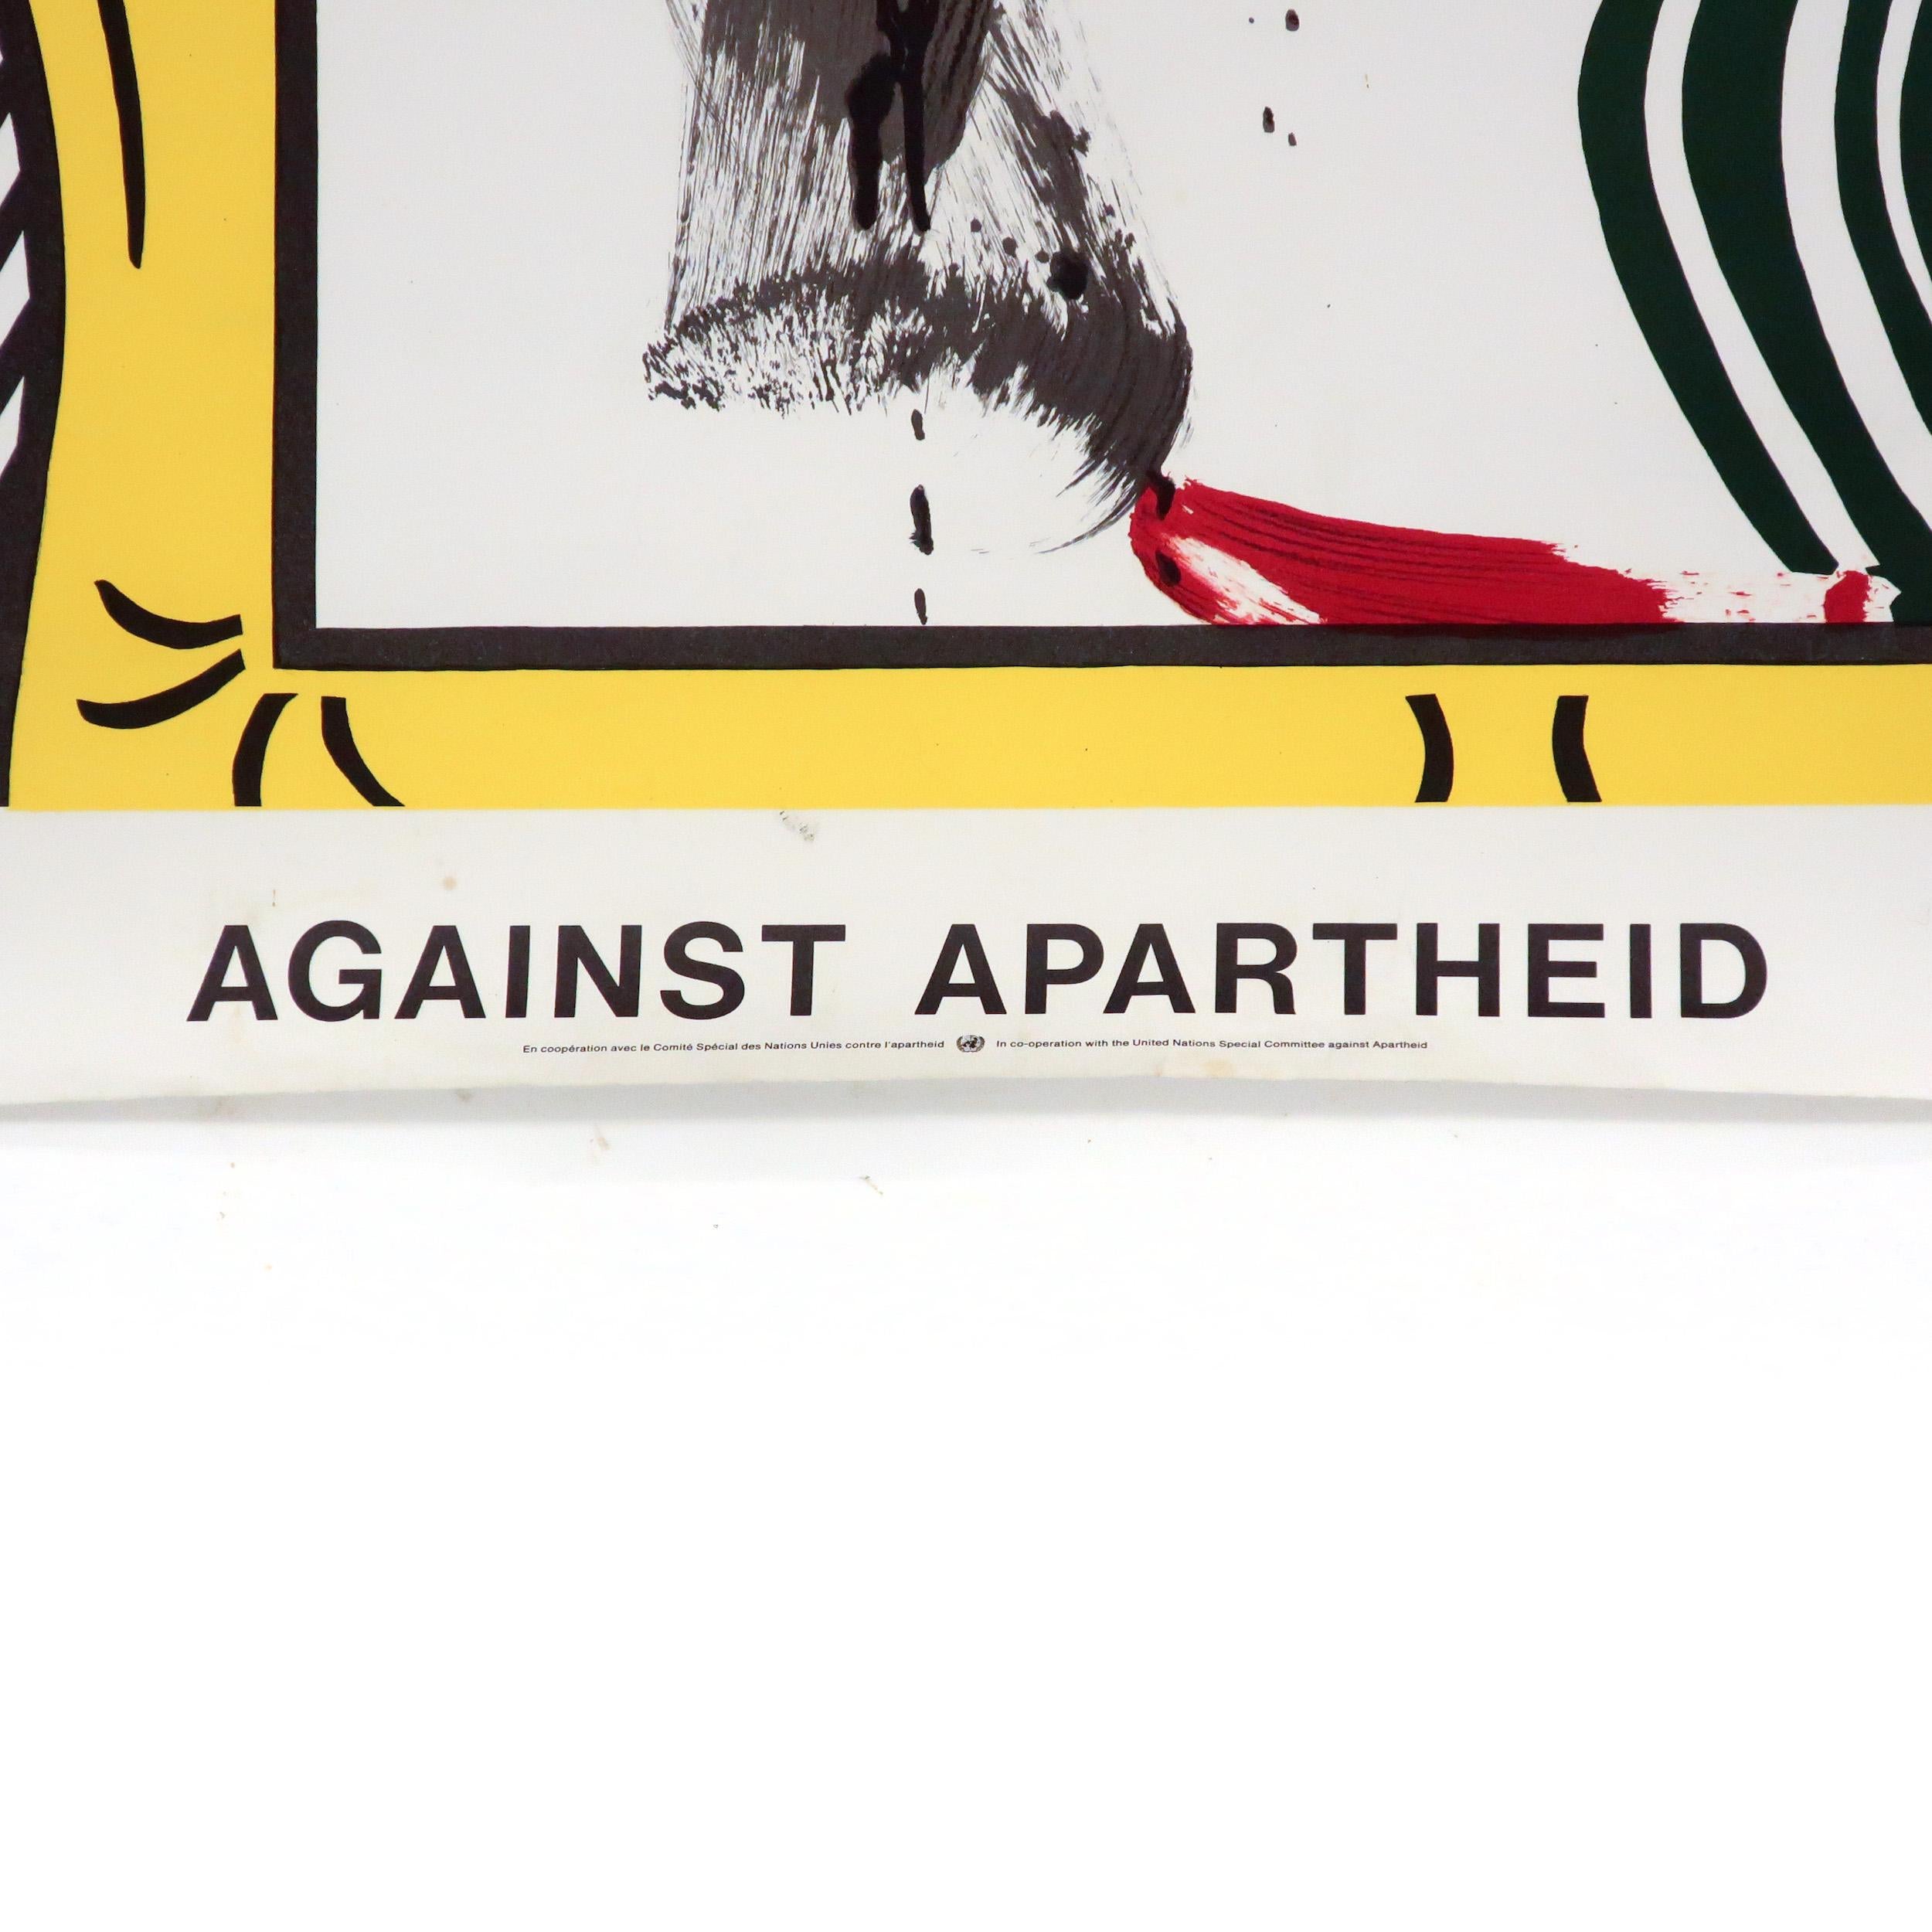 A 1983 lithograph designed and created by American artist Roy Lichtenstein (1923-1997) to help fight Apartheid -- a system of legal racial segregation enforced by the South African government between 1948 and 1994. One of several posters in a series